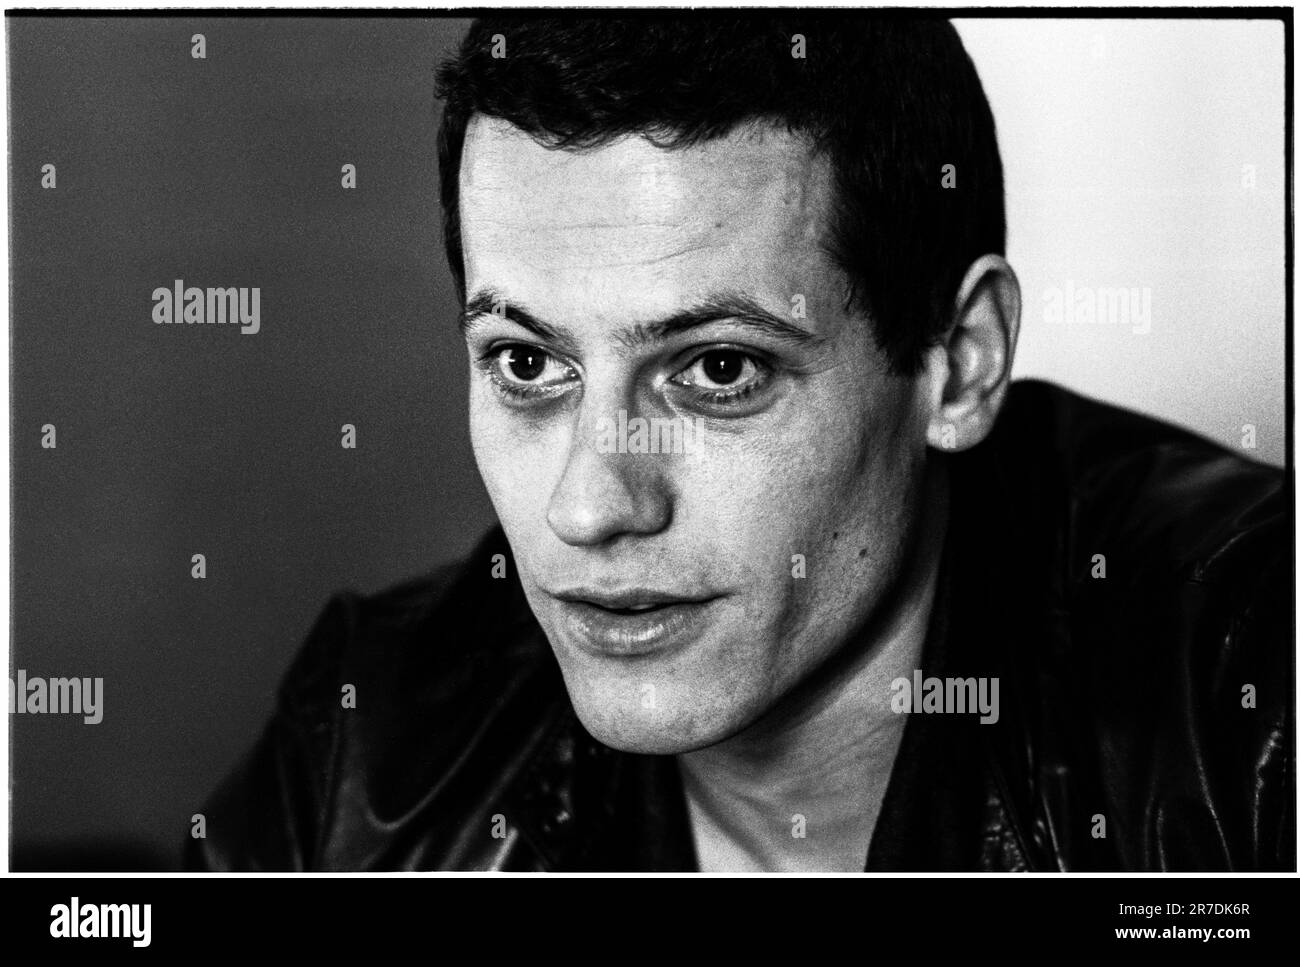 IOAN GRUFFUDD, ACTOR, 2001: Welsh actor Ioan Gruffudd at St David's Hotel in Cardiff in May 2001. He has a shaved head for his role in Black Hawk Down. Photo: Rob Watkins Stock Photo